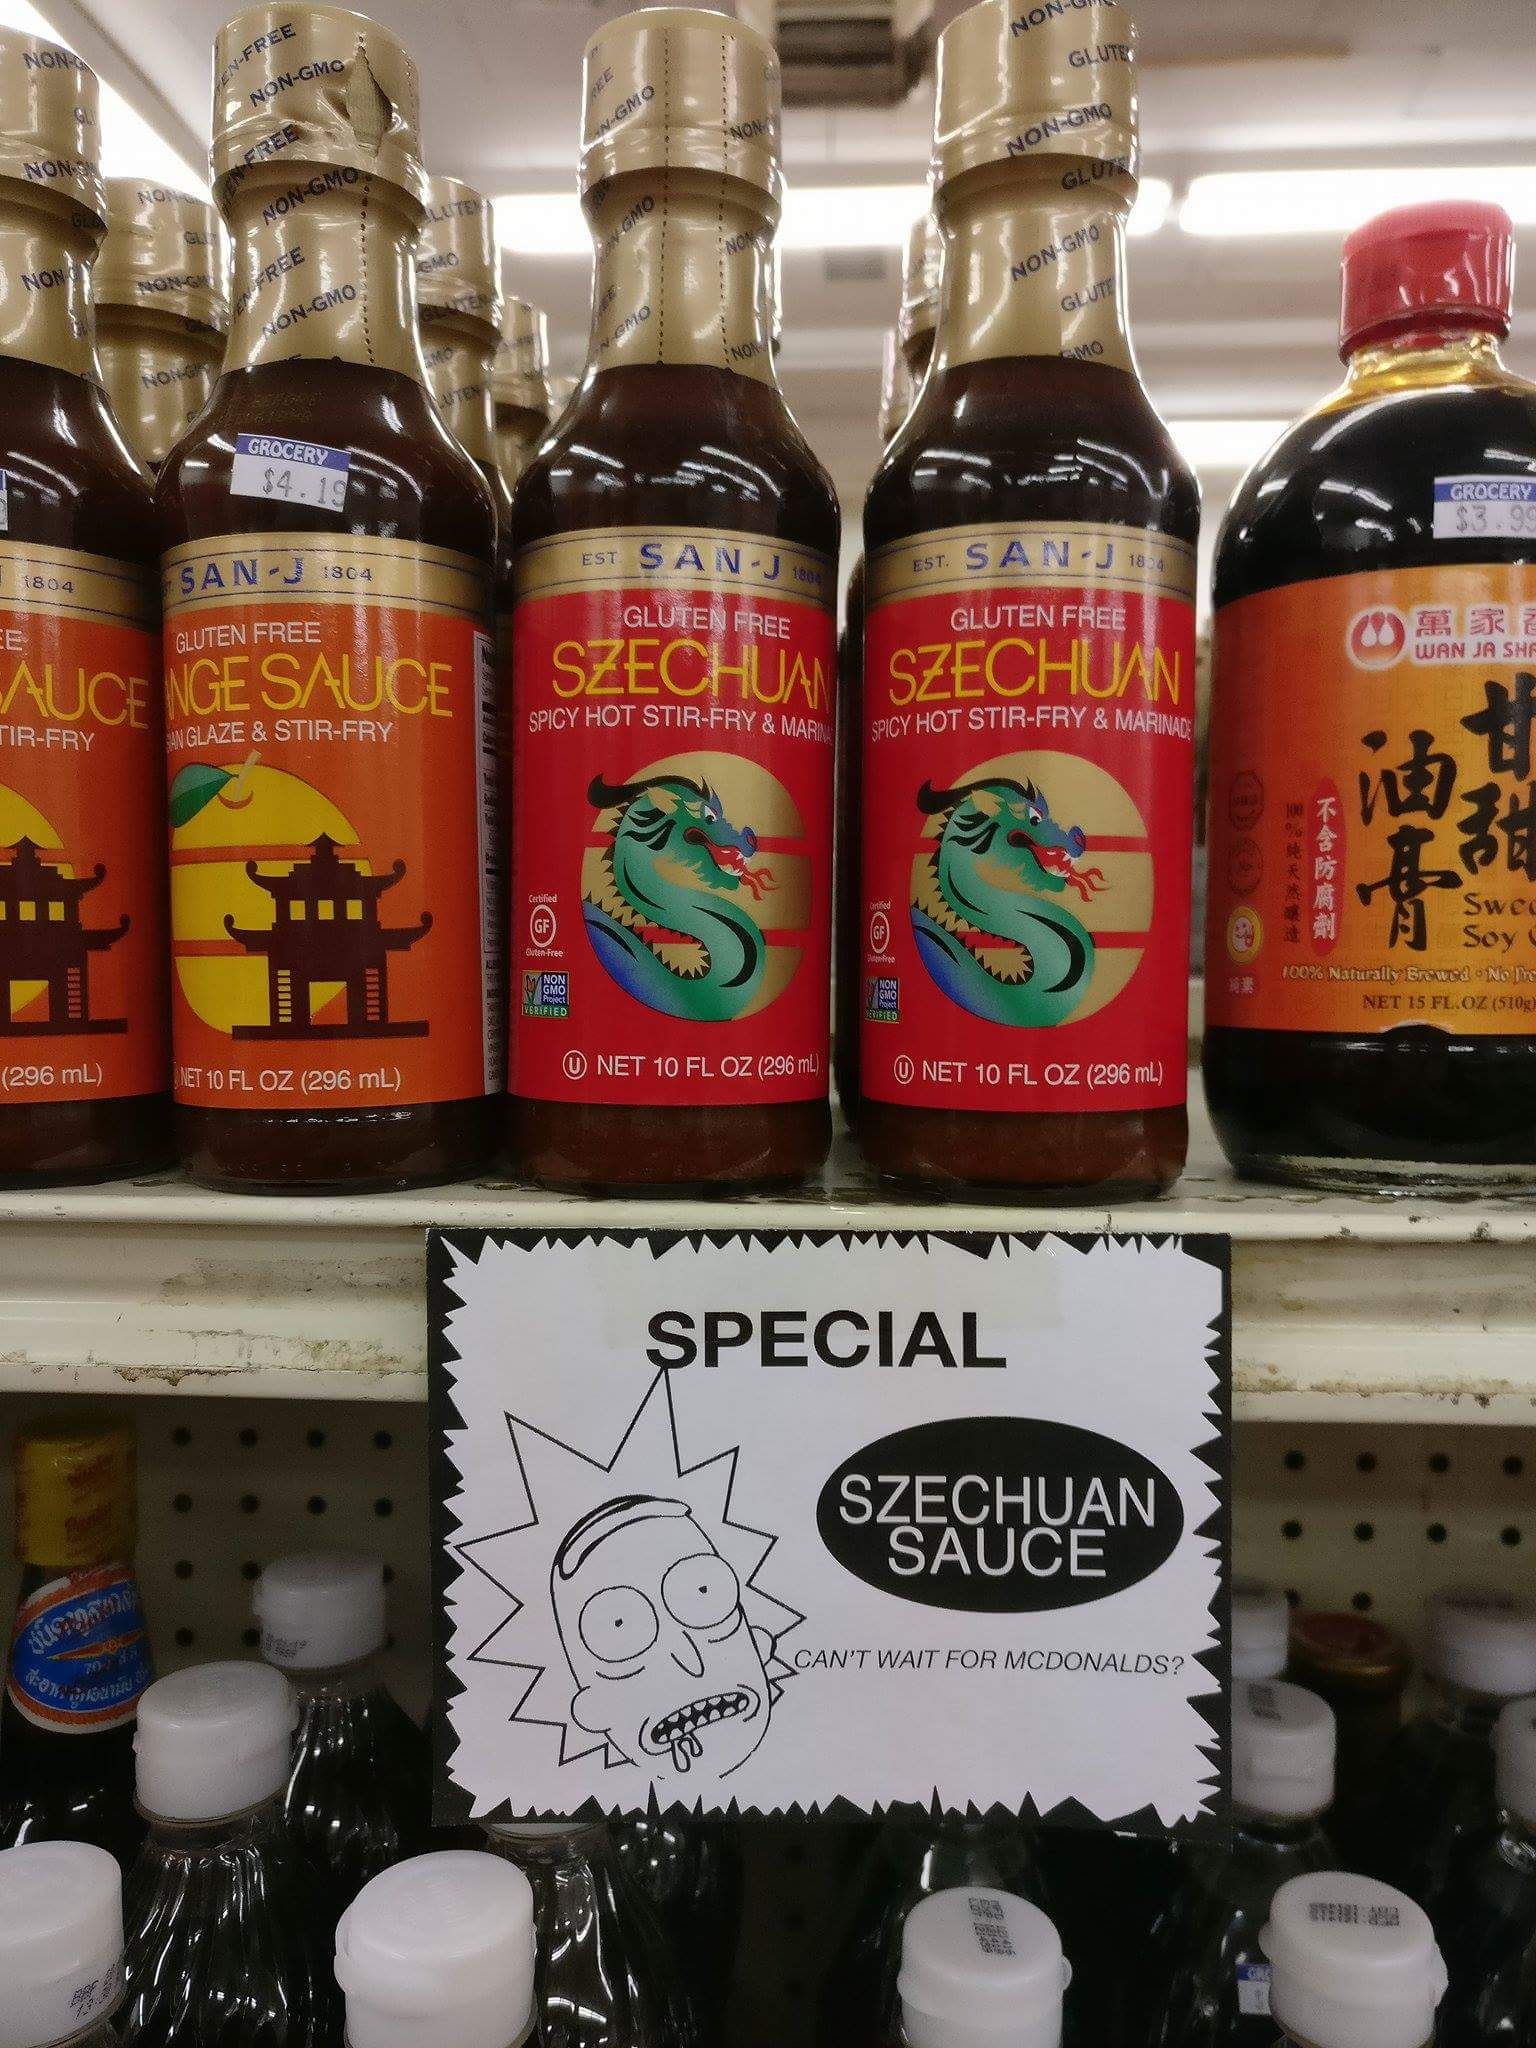 My friend in Utah found this at a her grocery store!